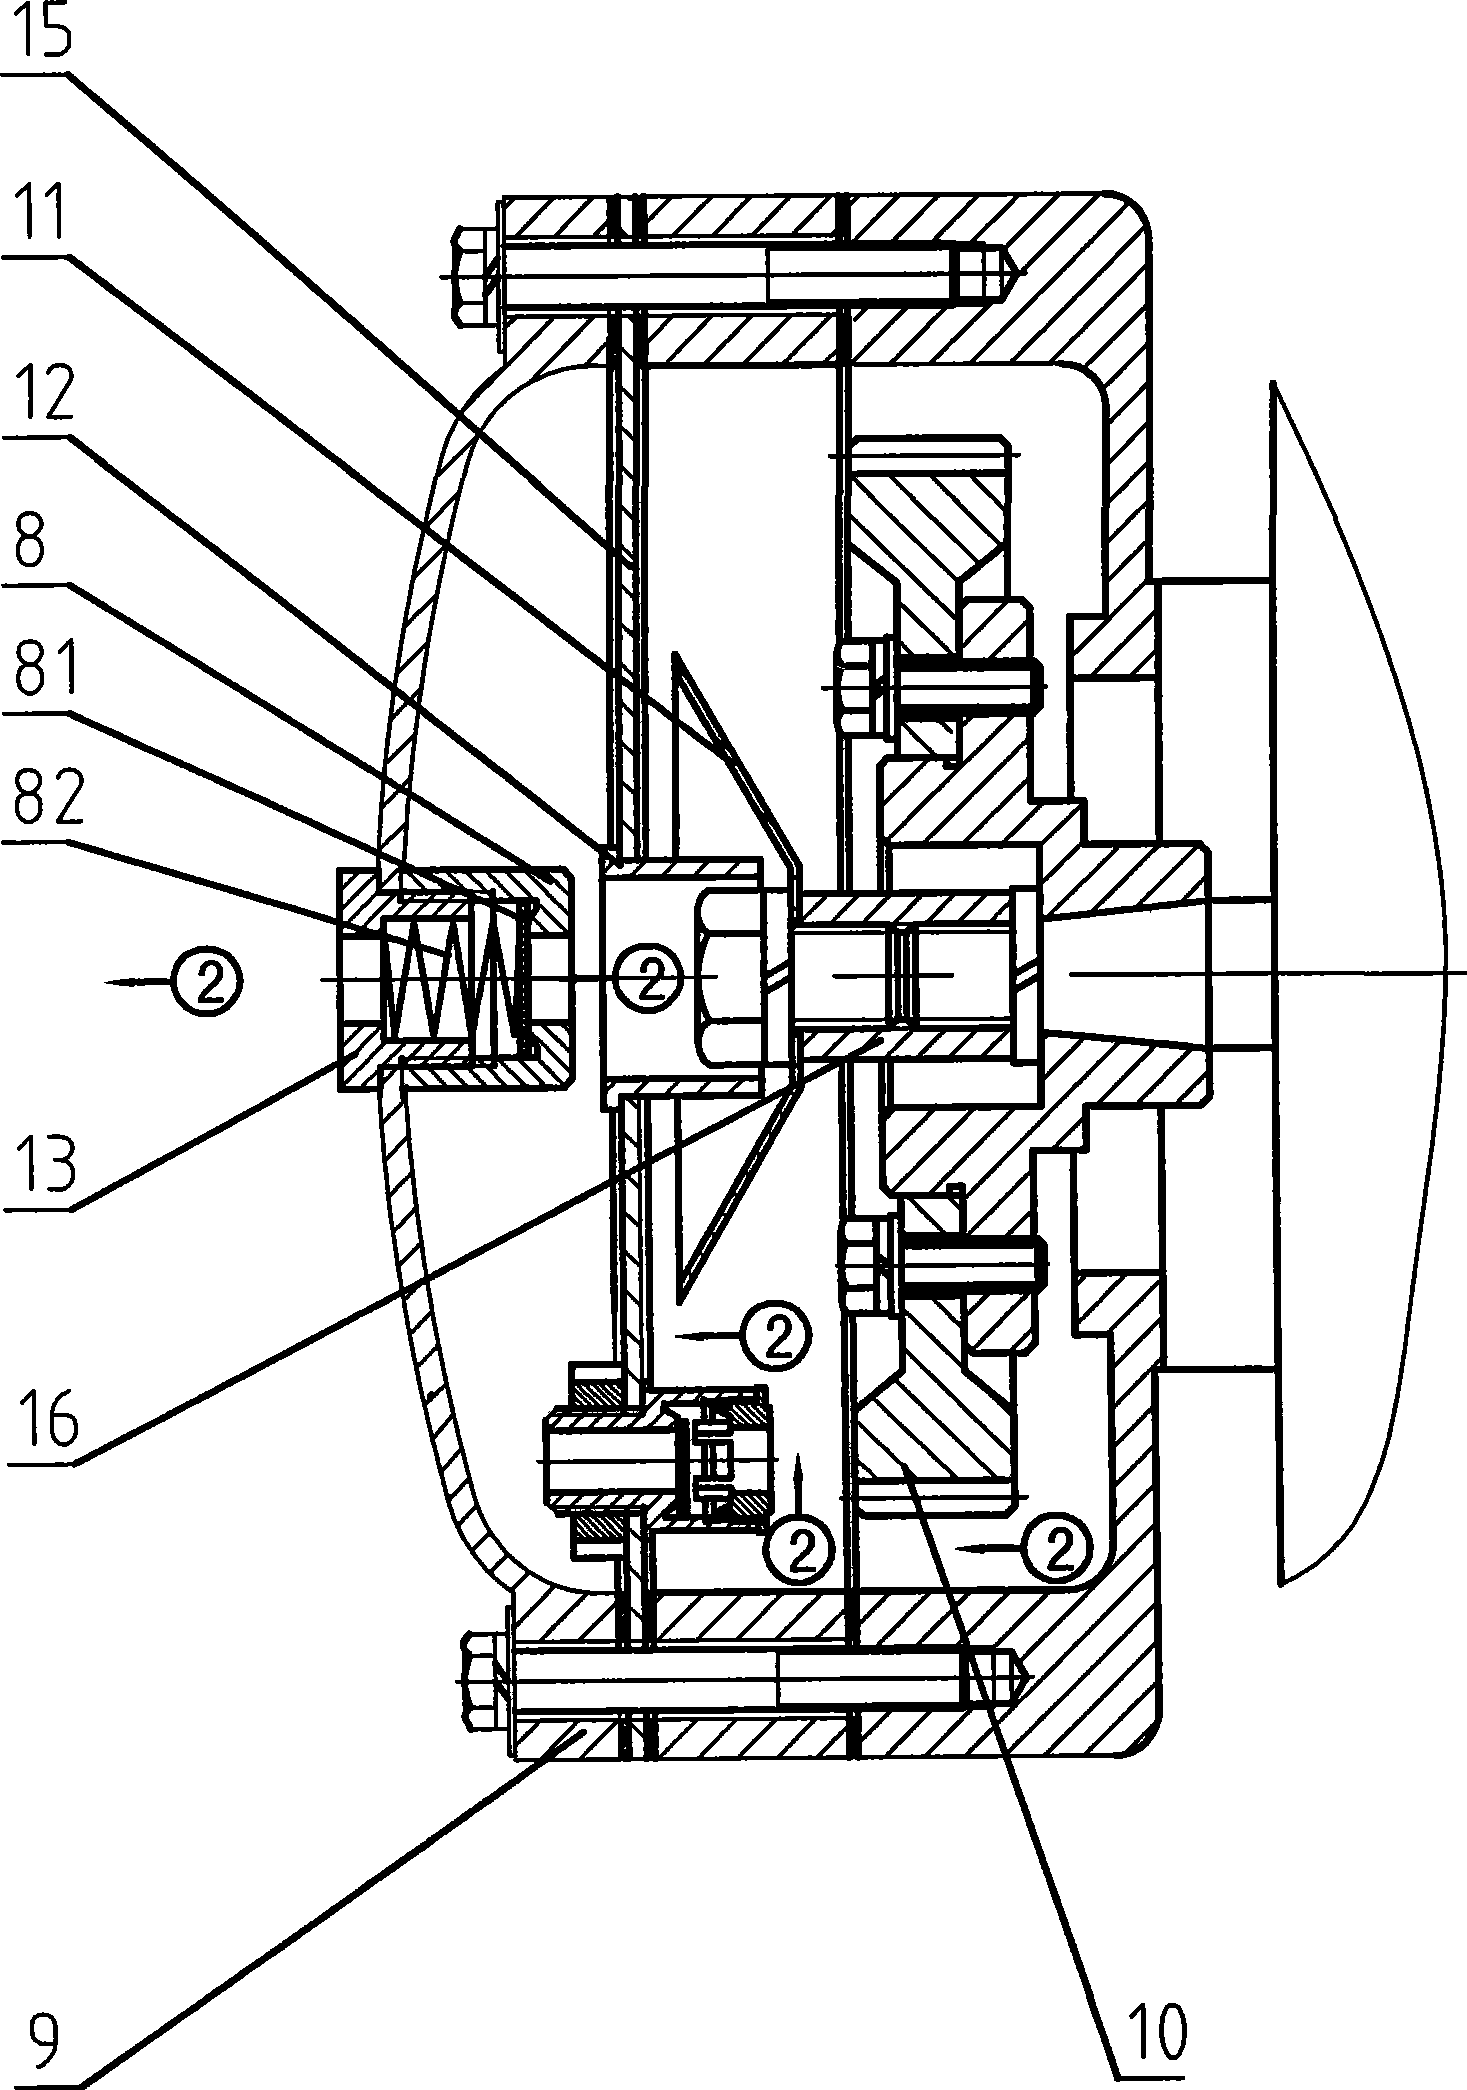 Non-stopping device for lifeboat diesel engine while inversion